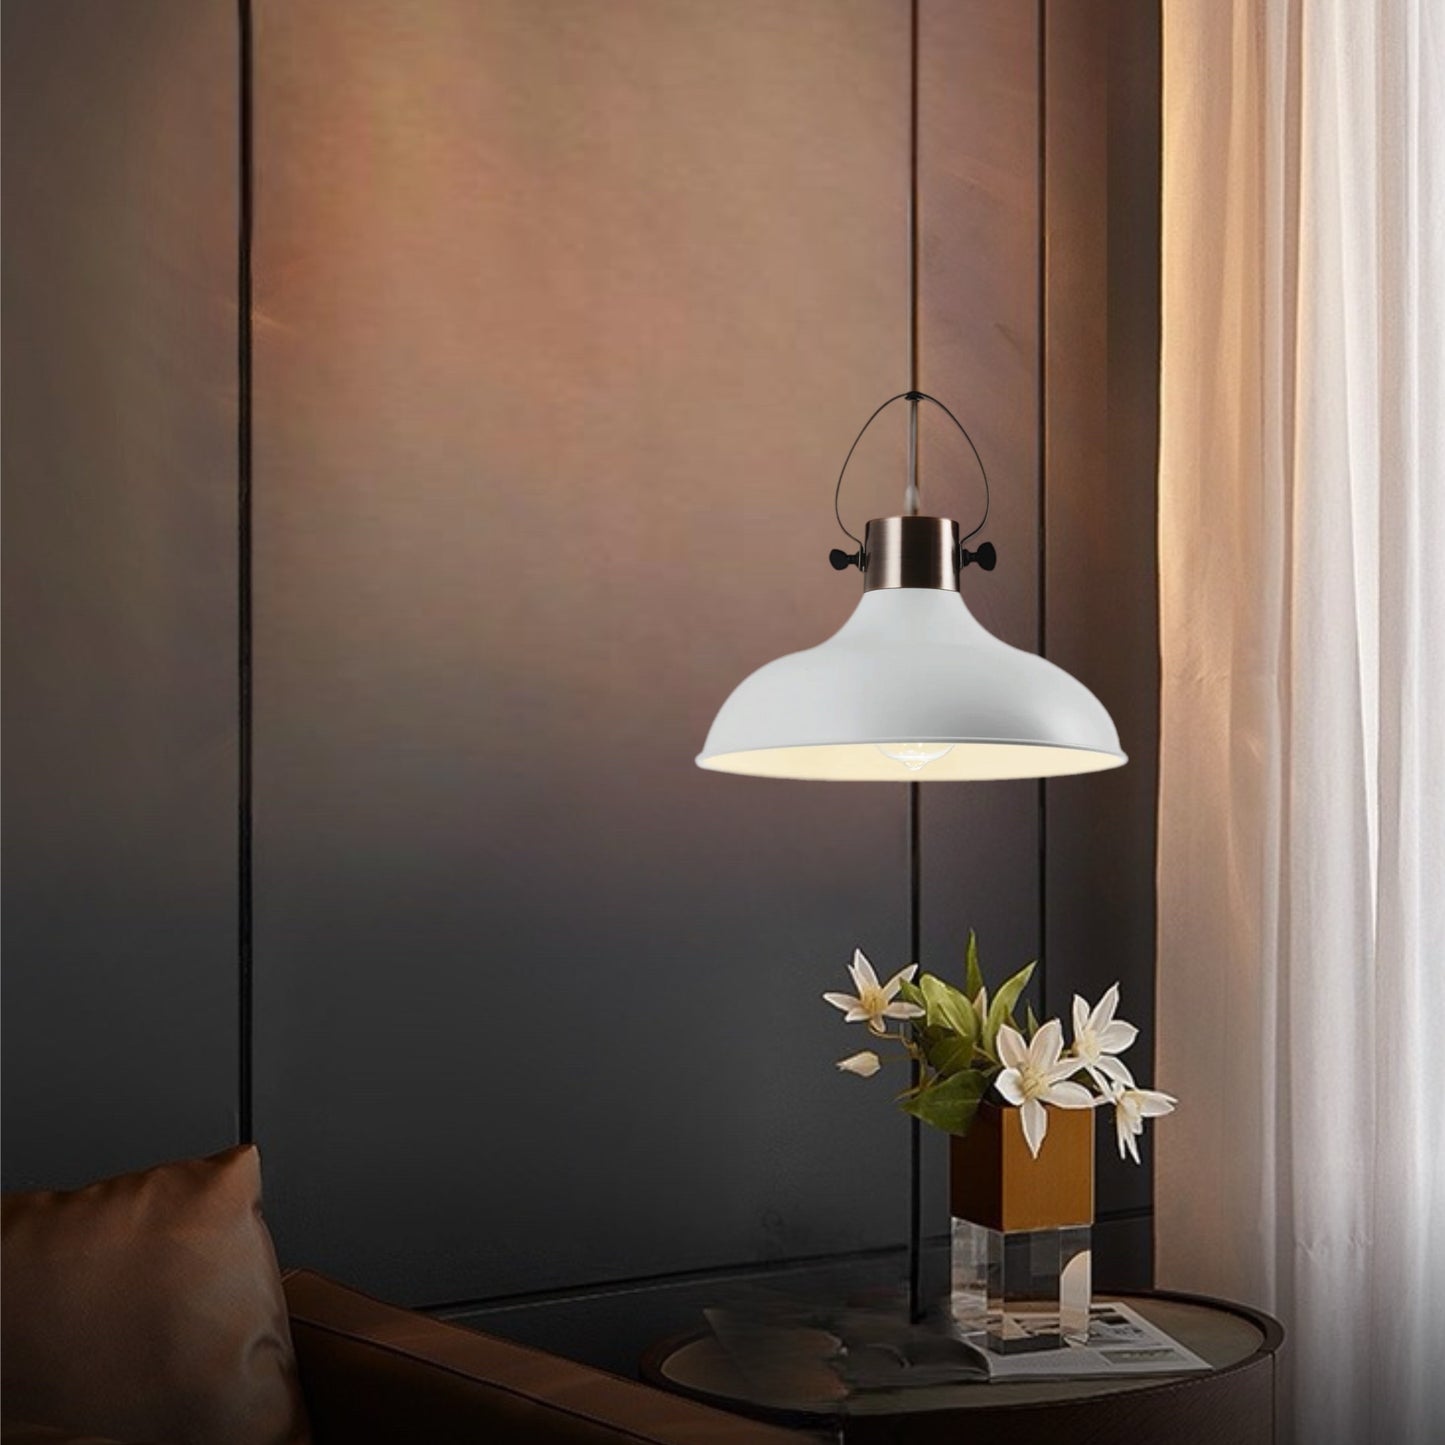 Our popular Wanda ceiling light, comes in a signature dome shape with contrasting top. It is height-adjustable at the point of installation so you can position it to your exact requirements. One E27 bulb is required and as it enhances such a warm and inviting glow, would look great above kitchen islands, dining tables or as main light fitting in any room